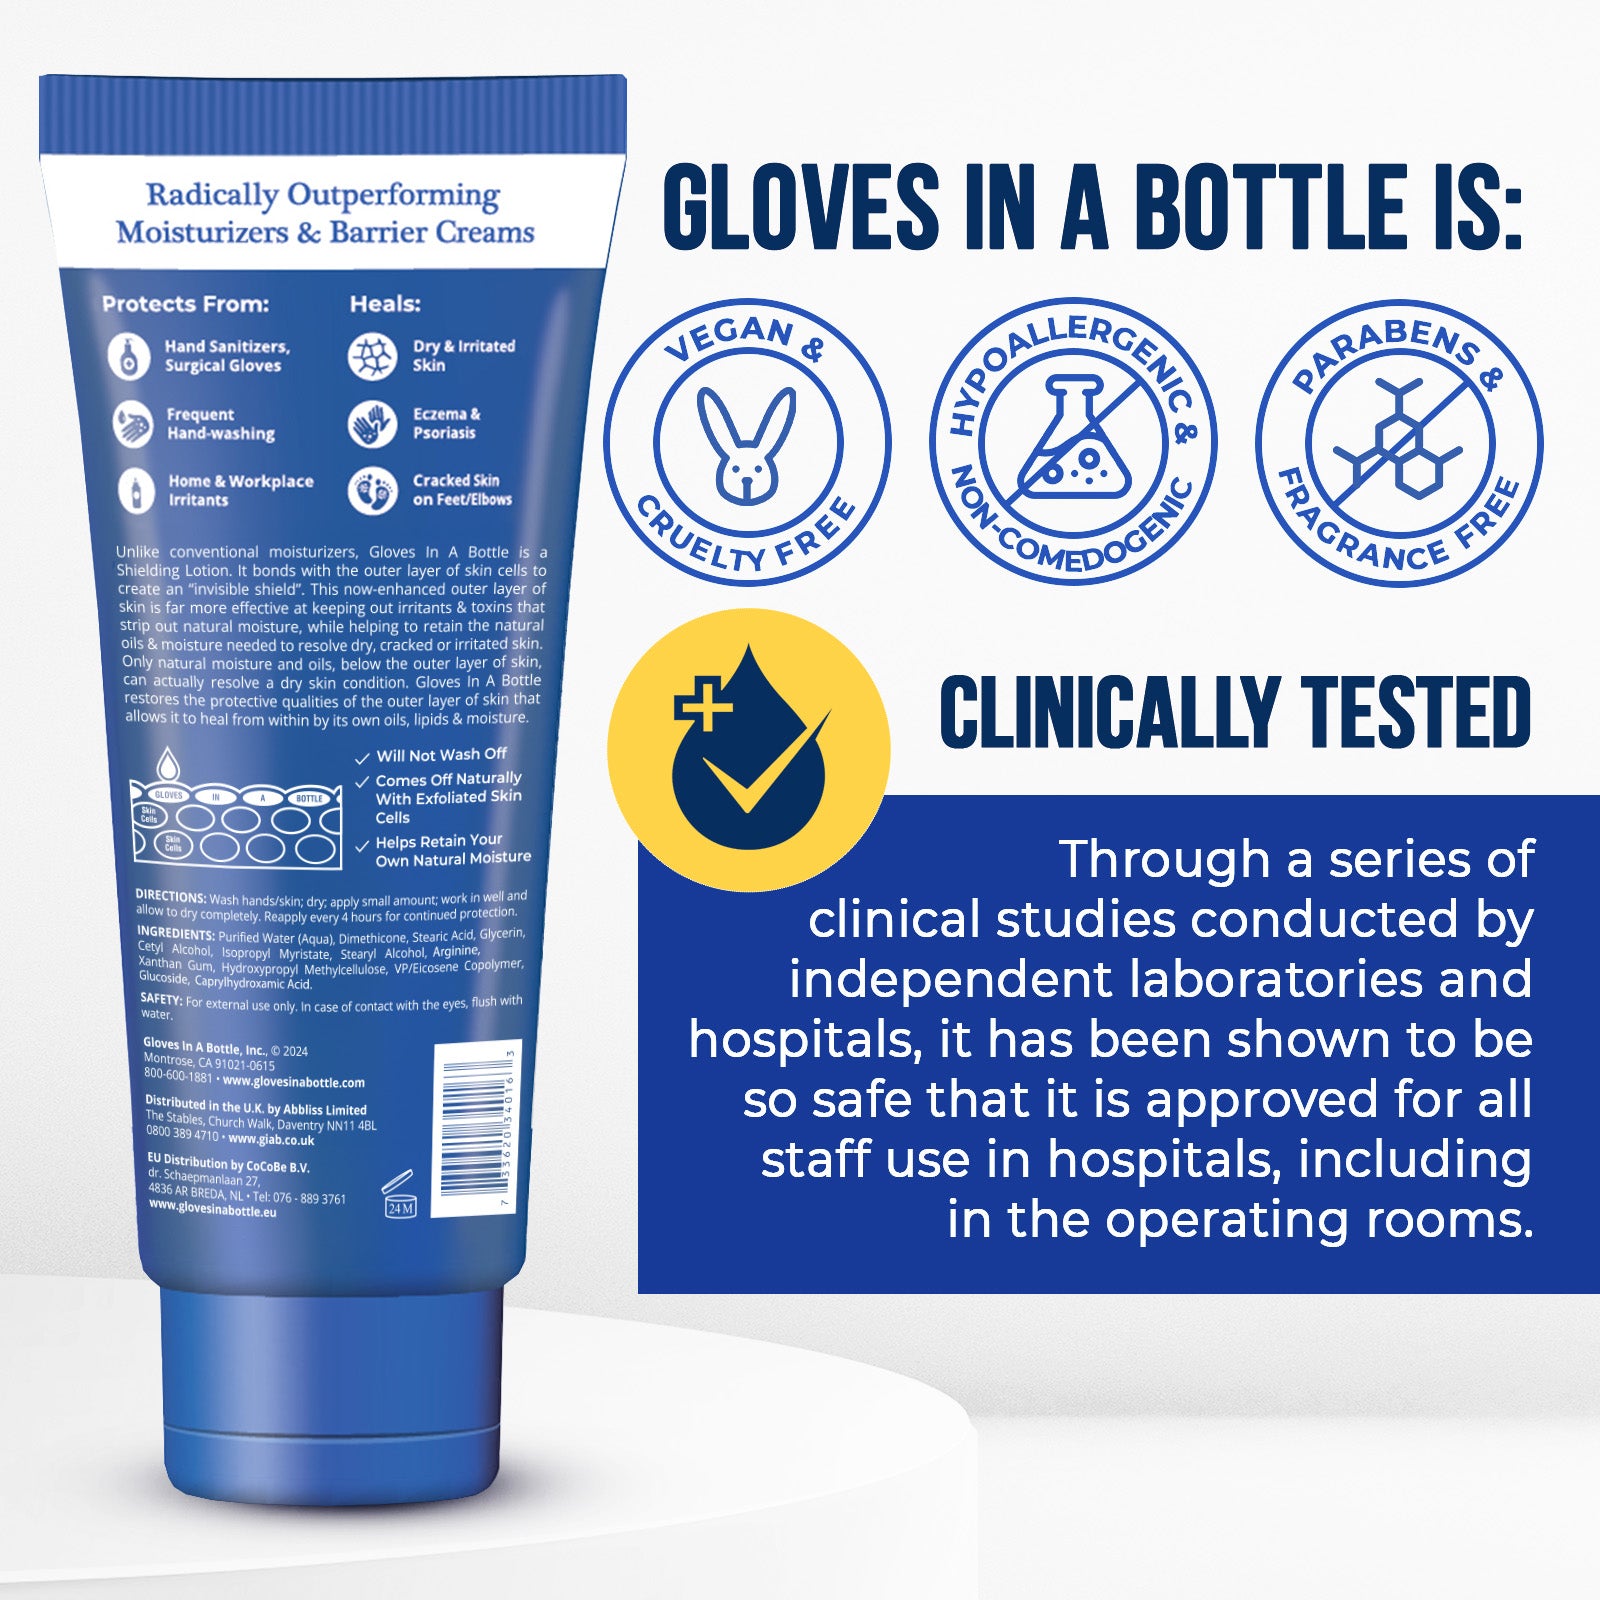 Gloves In A Bottle –  Hand Shielding Lotion for Dry Skin, Hand Lotion Travel Size – 3.4 oz